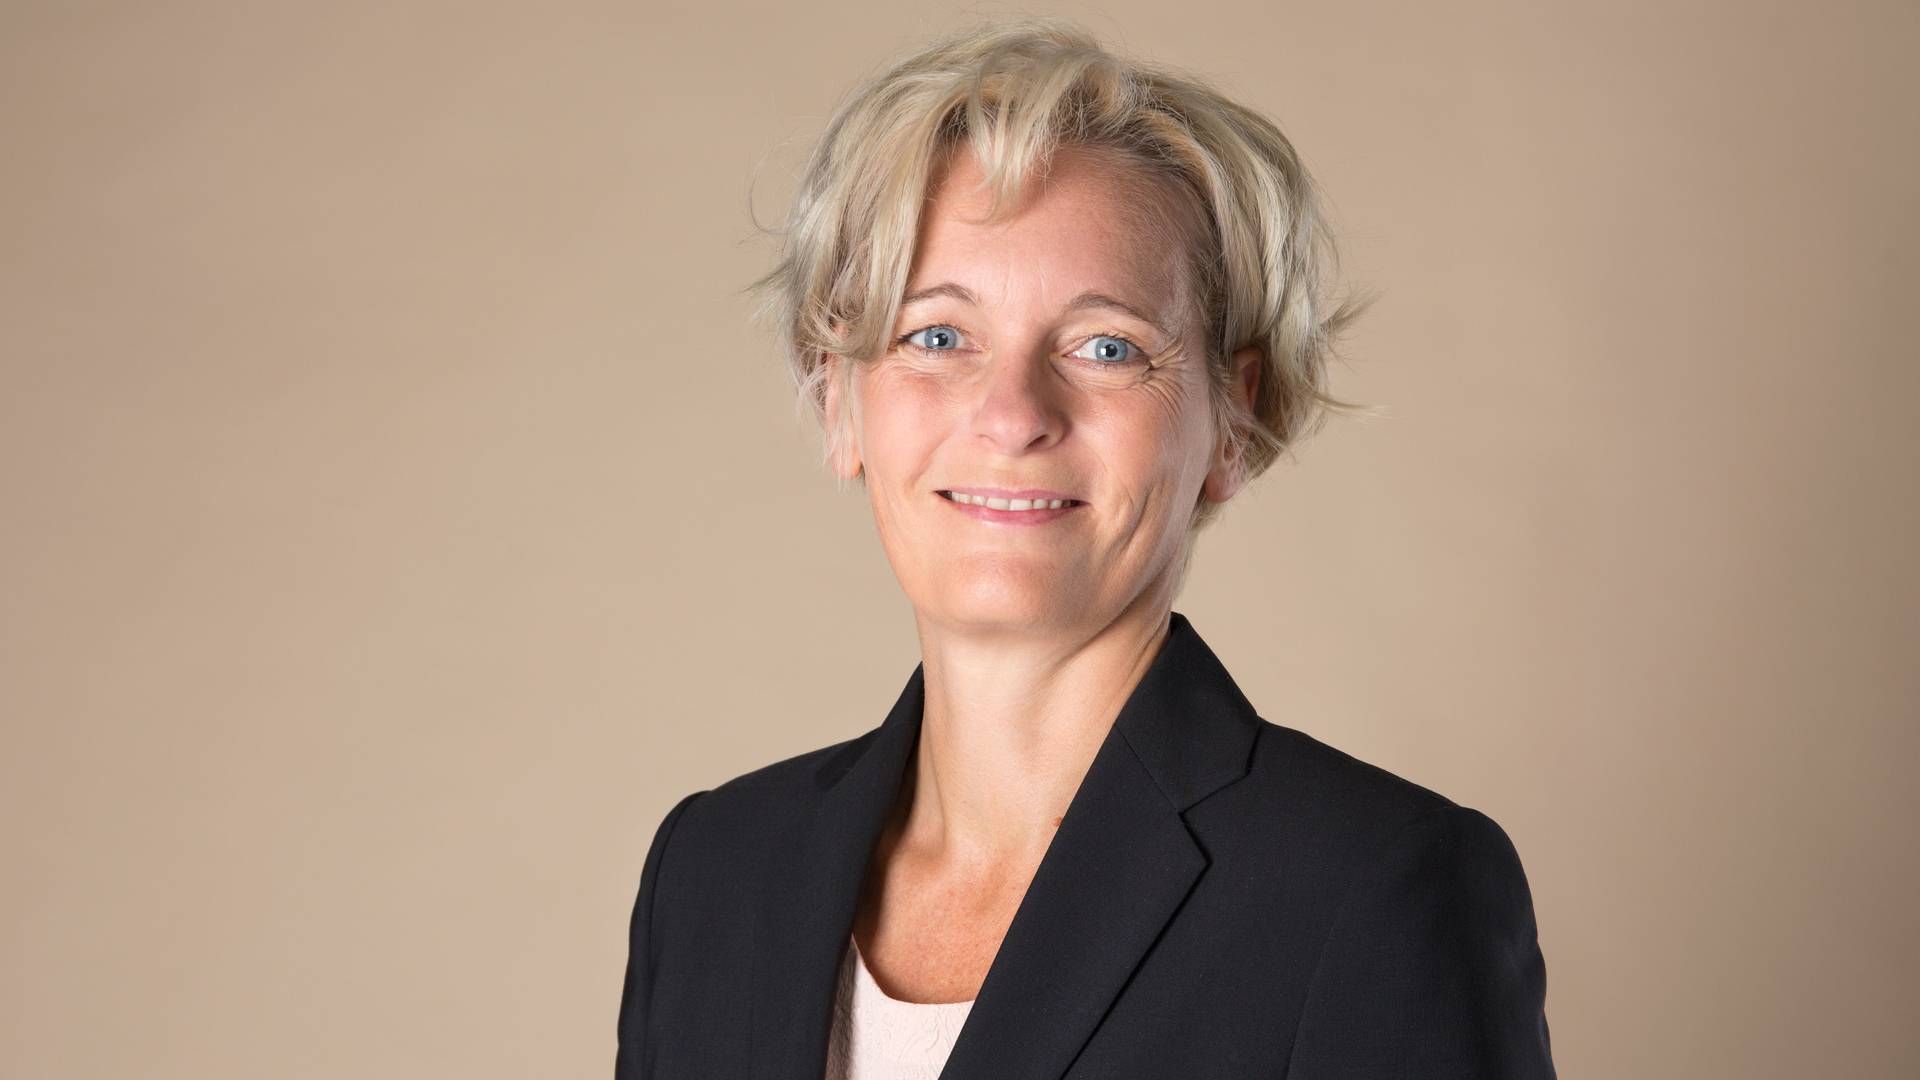 Pernille Sindby has worked for the Nykredit Group for more than 20 years. | Photo: PR/Nykredit